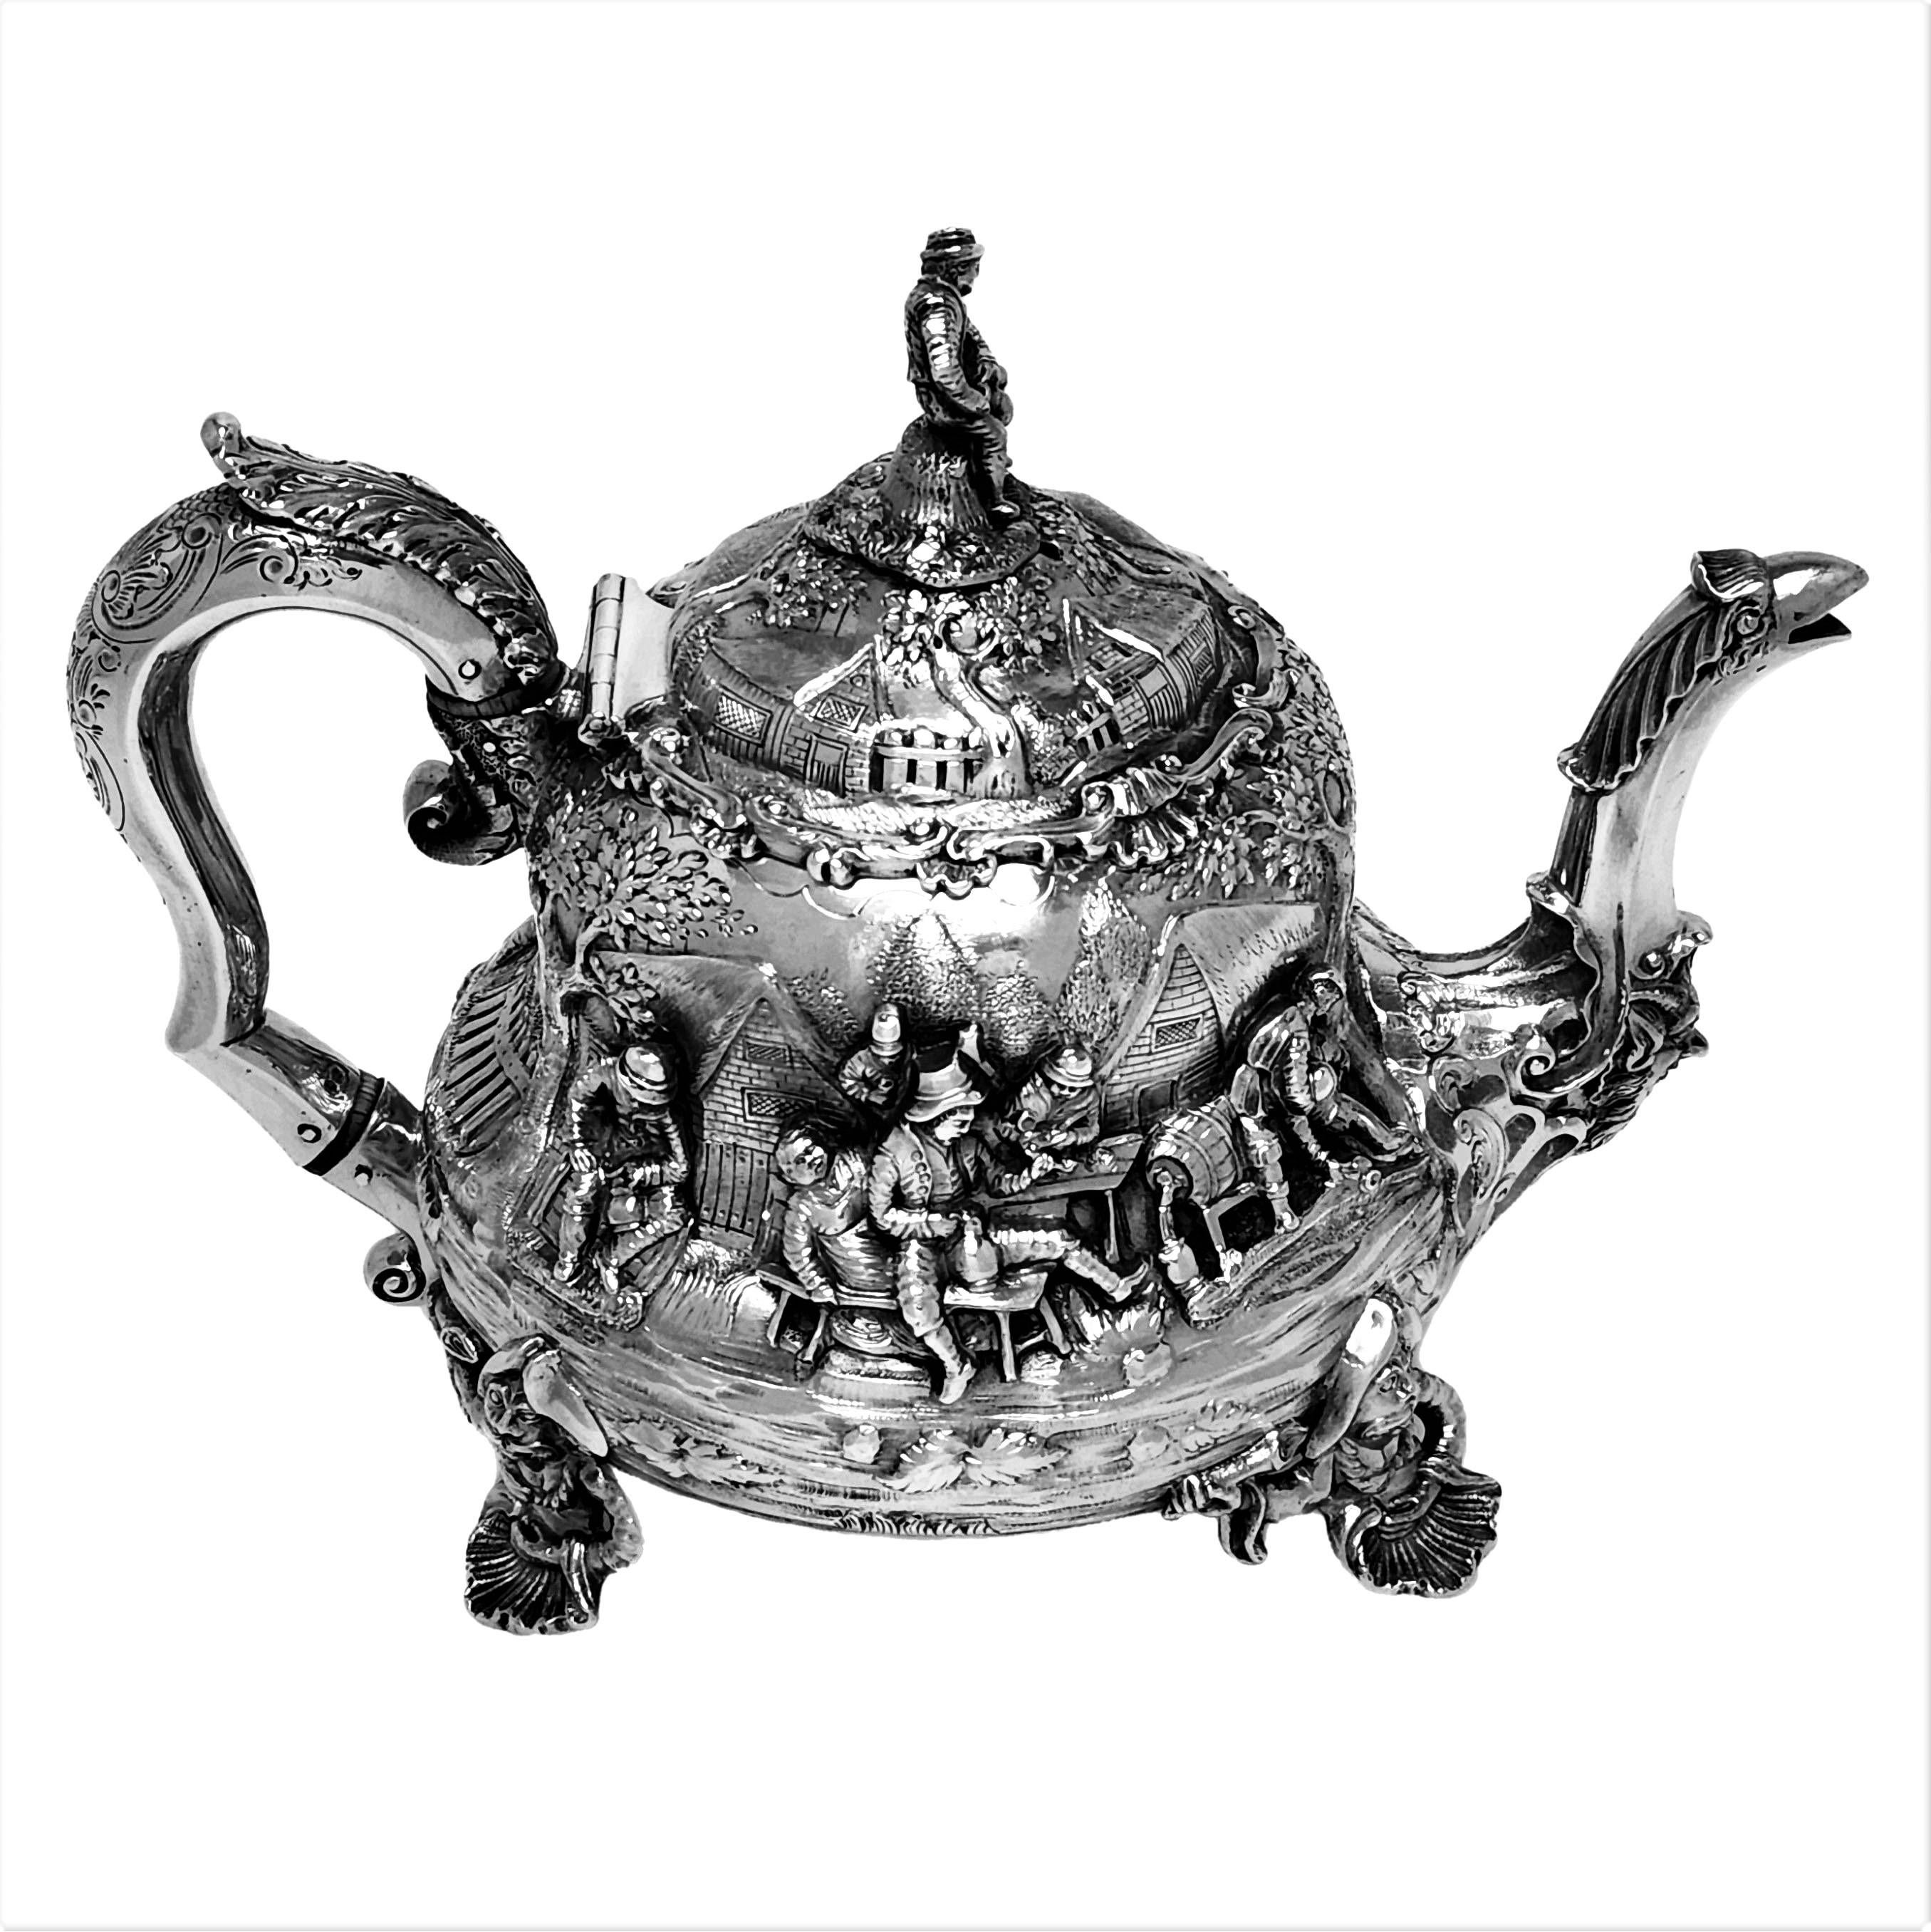 A magnificent Antique Victorian Silver Teapot in a pear shape and featuring ornate chased and applied images of people revelling and drinking in the style of the Dutch Painter David Teniers the Younger, who known for his detailed depictions of